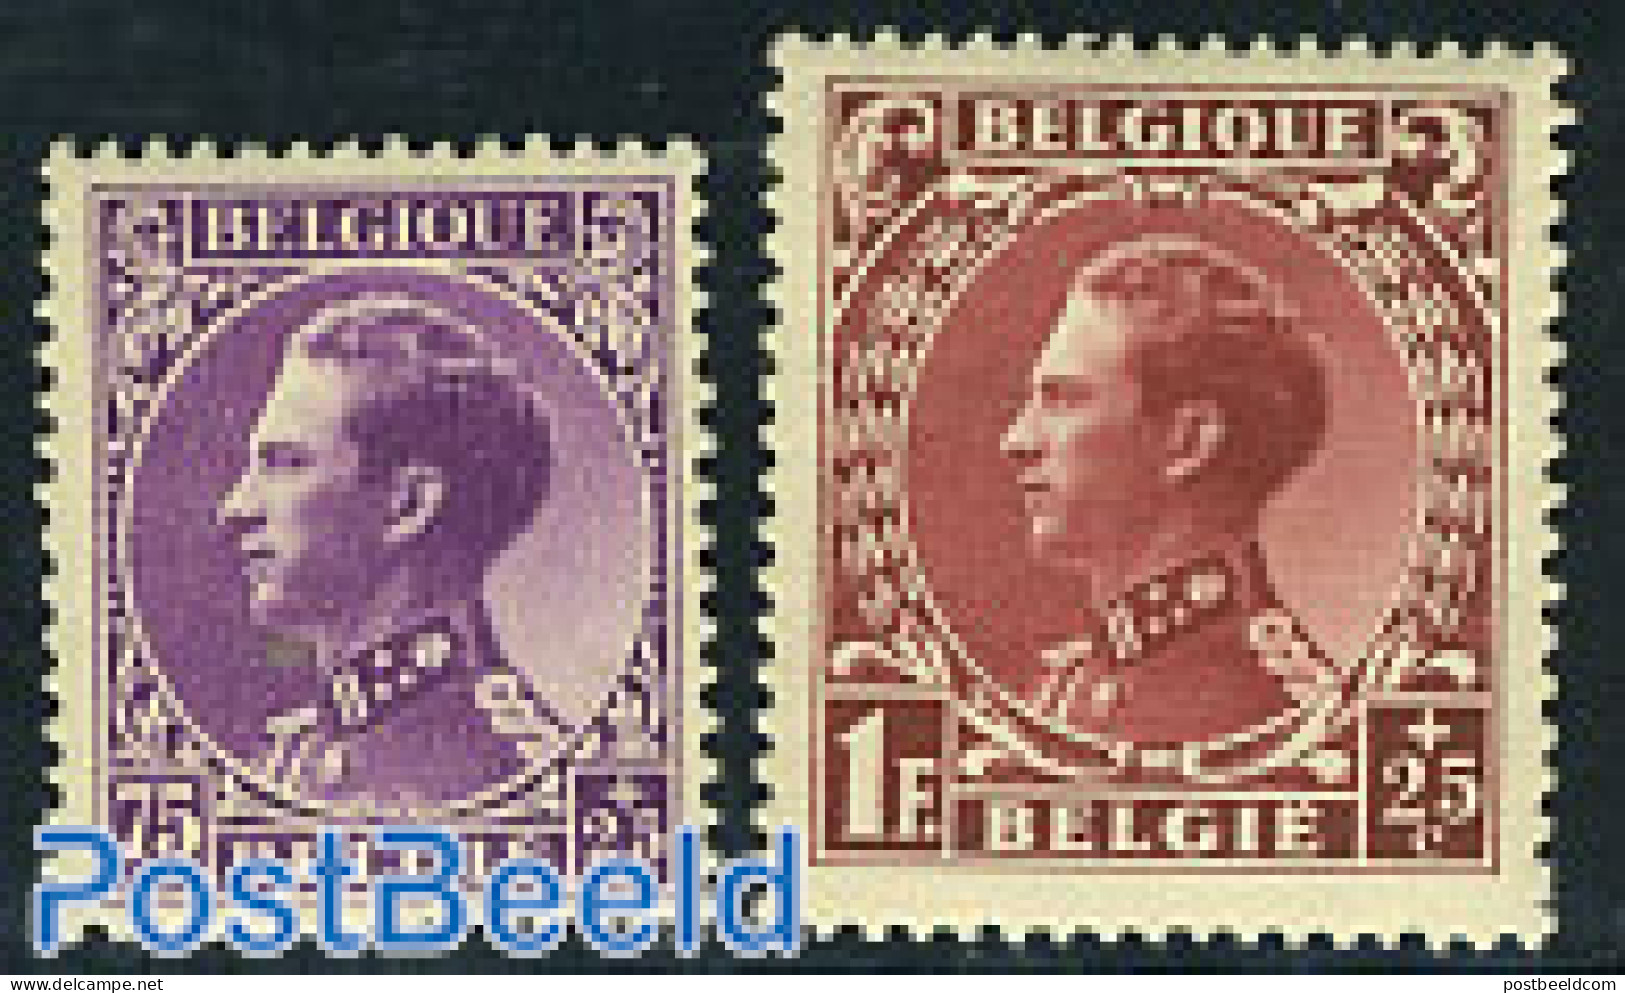 Belgium 1934 War Disabled 2v, Unused (hinged), Health - History - Disabled Persons - World War I - Unused Stamps